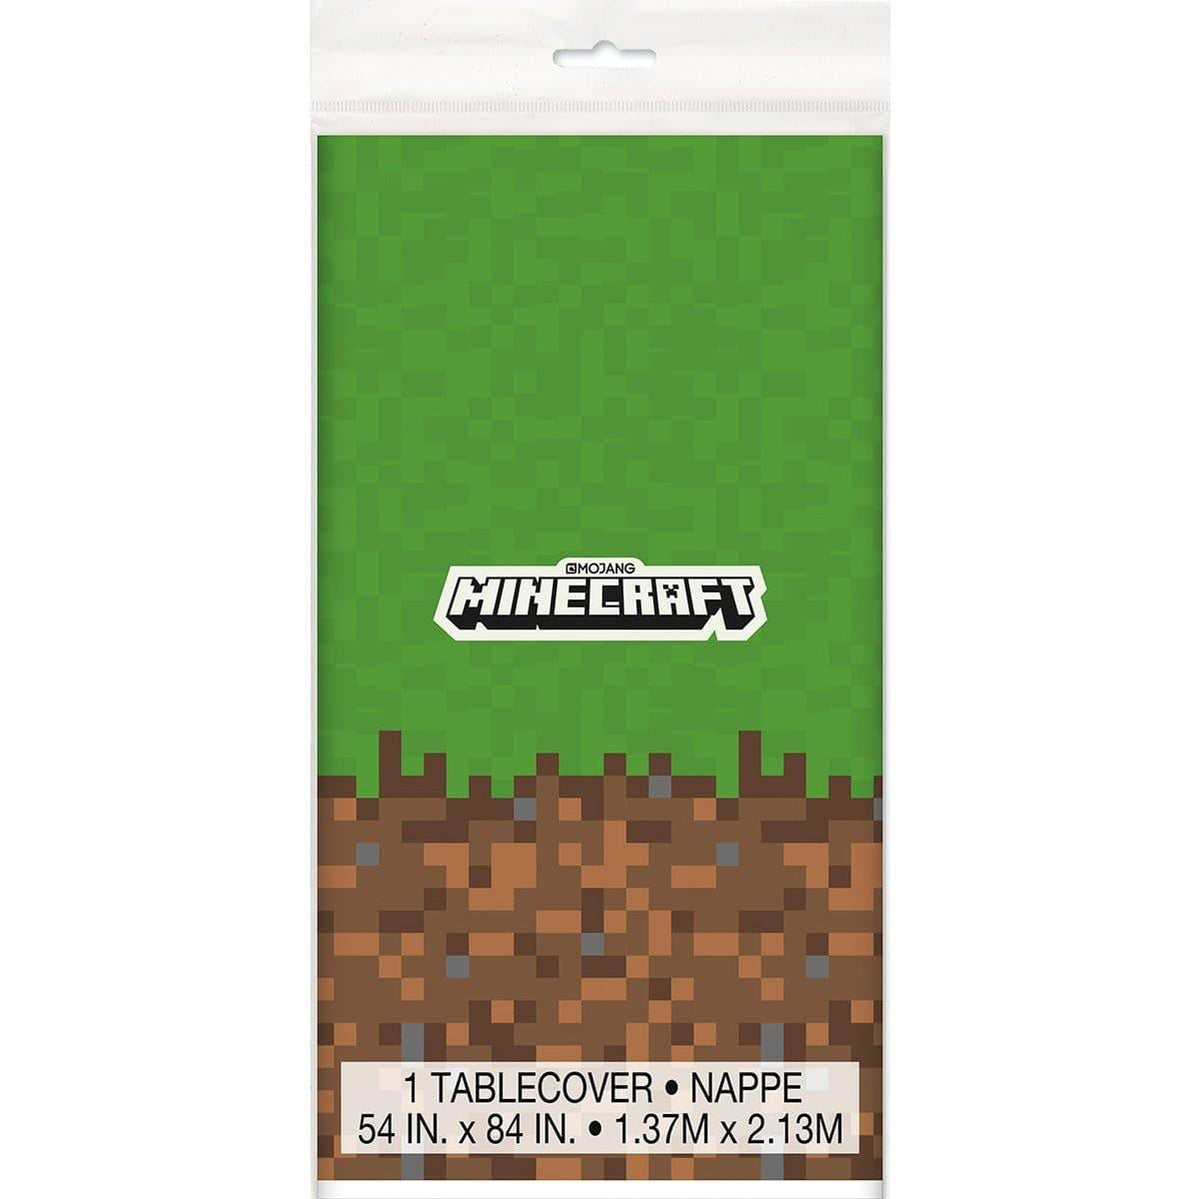 Buy Kids Birthday Minecraft tablecover sold at Party Expert